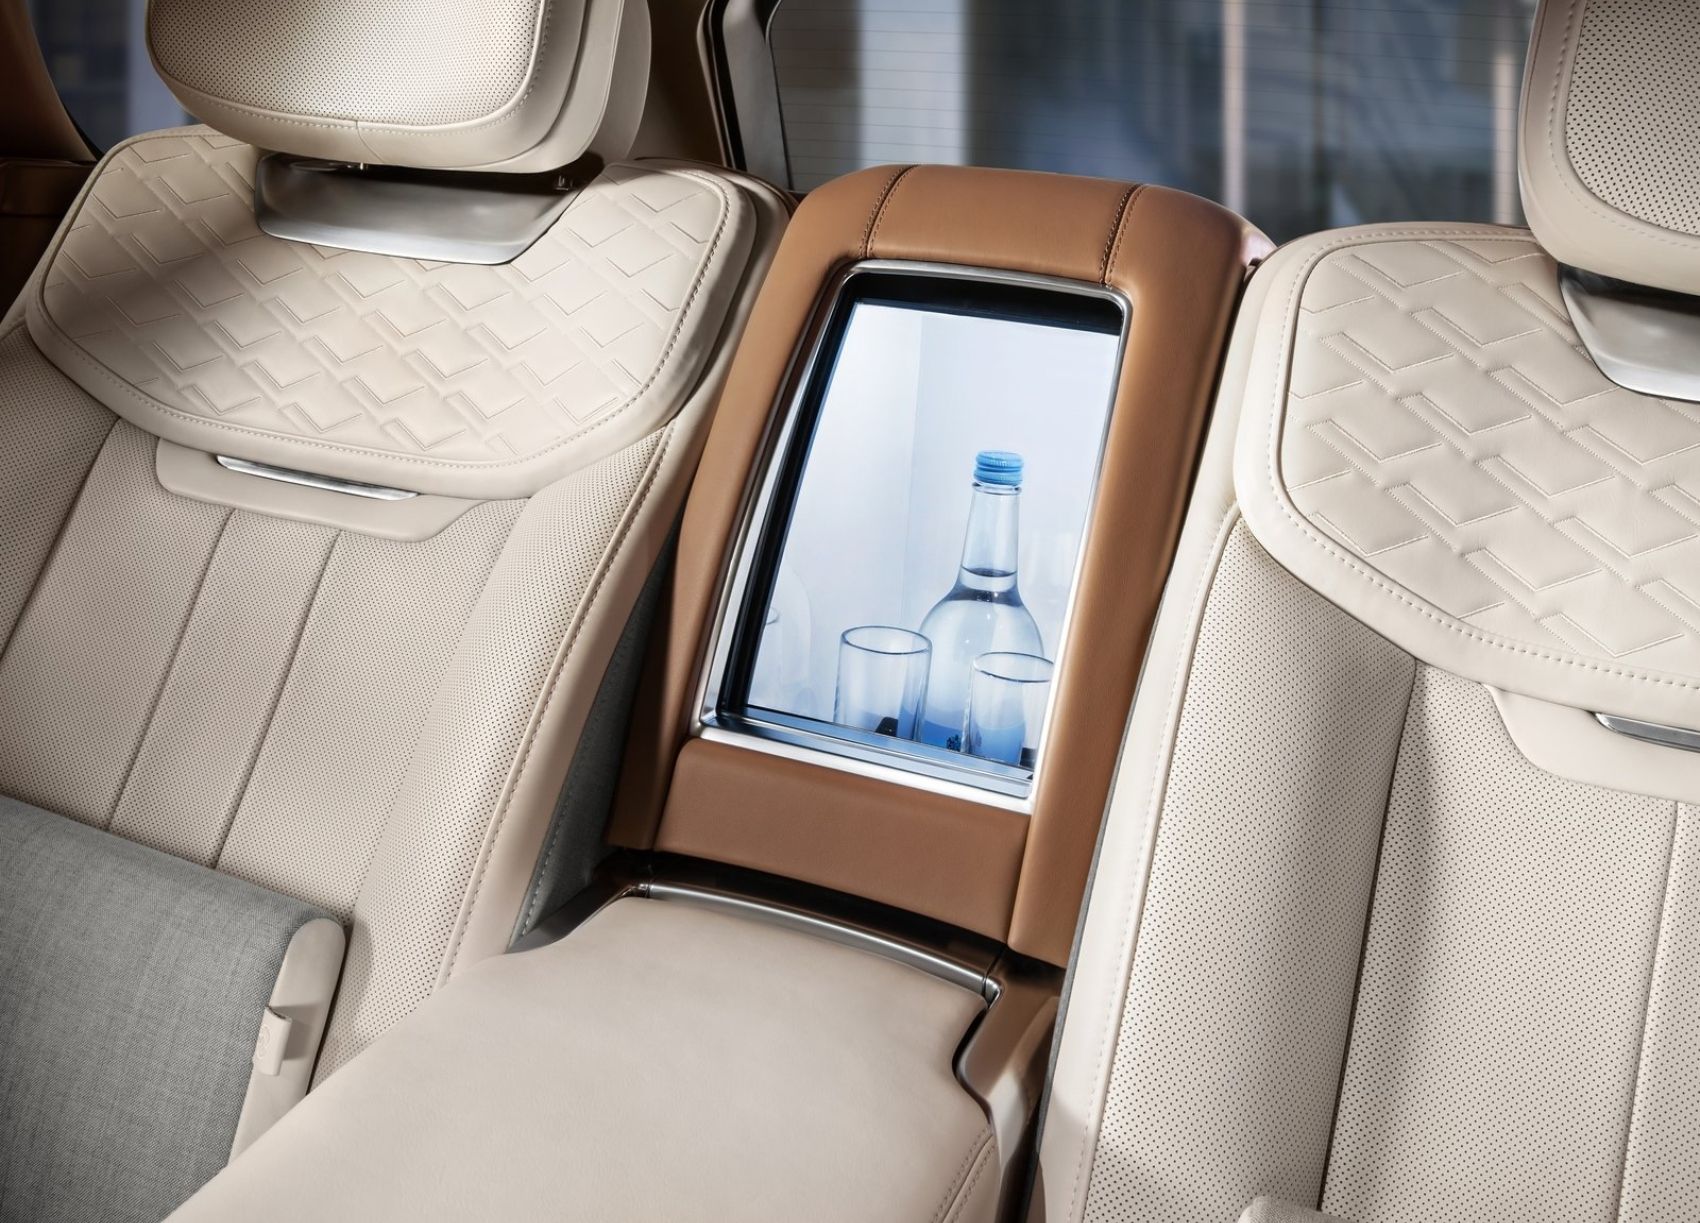 Refrigerator between the rear seats of the Range Rover SV LWB